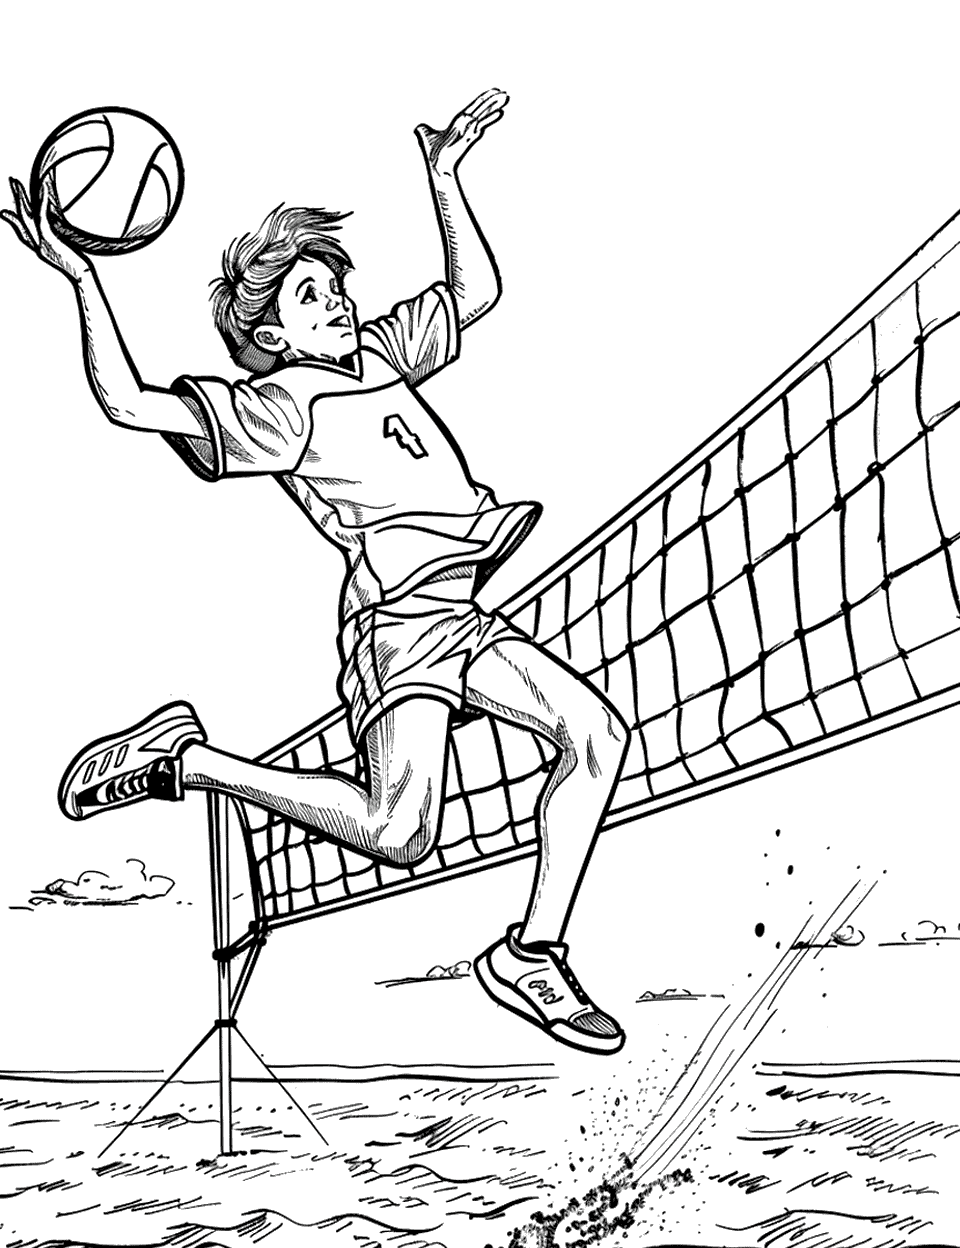 Volleyball Beach Spike Sports Coloring Page - A player jumping to spike a volleyball on the beach, with the net in view.